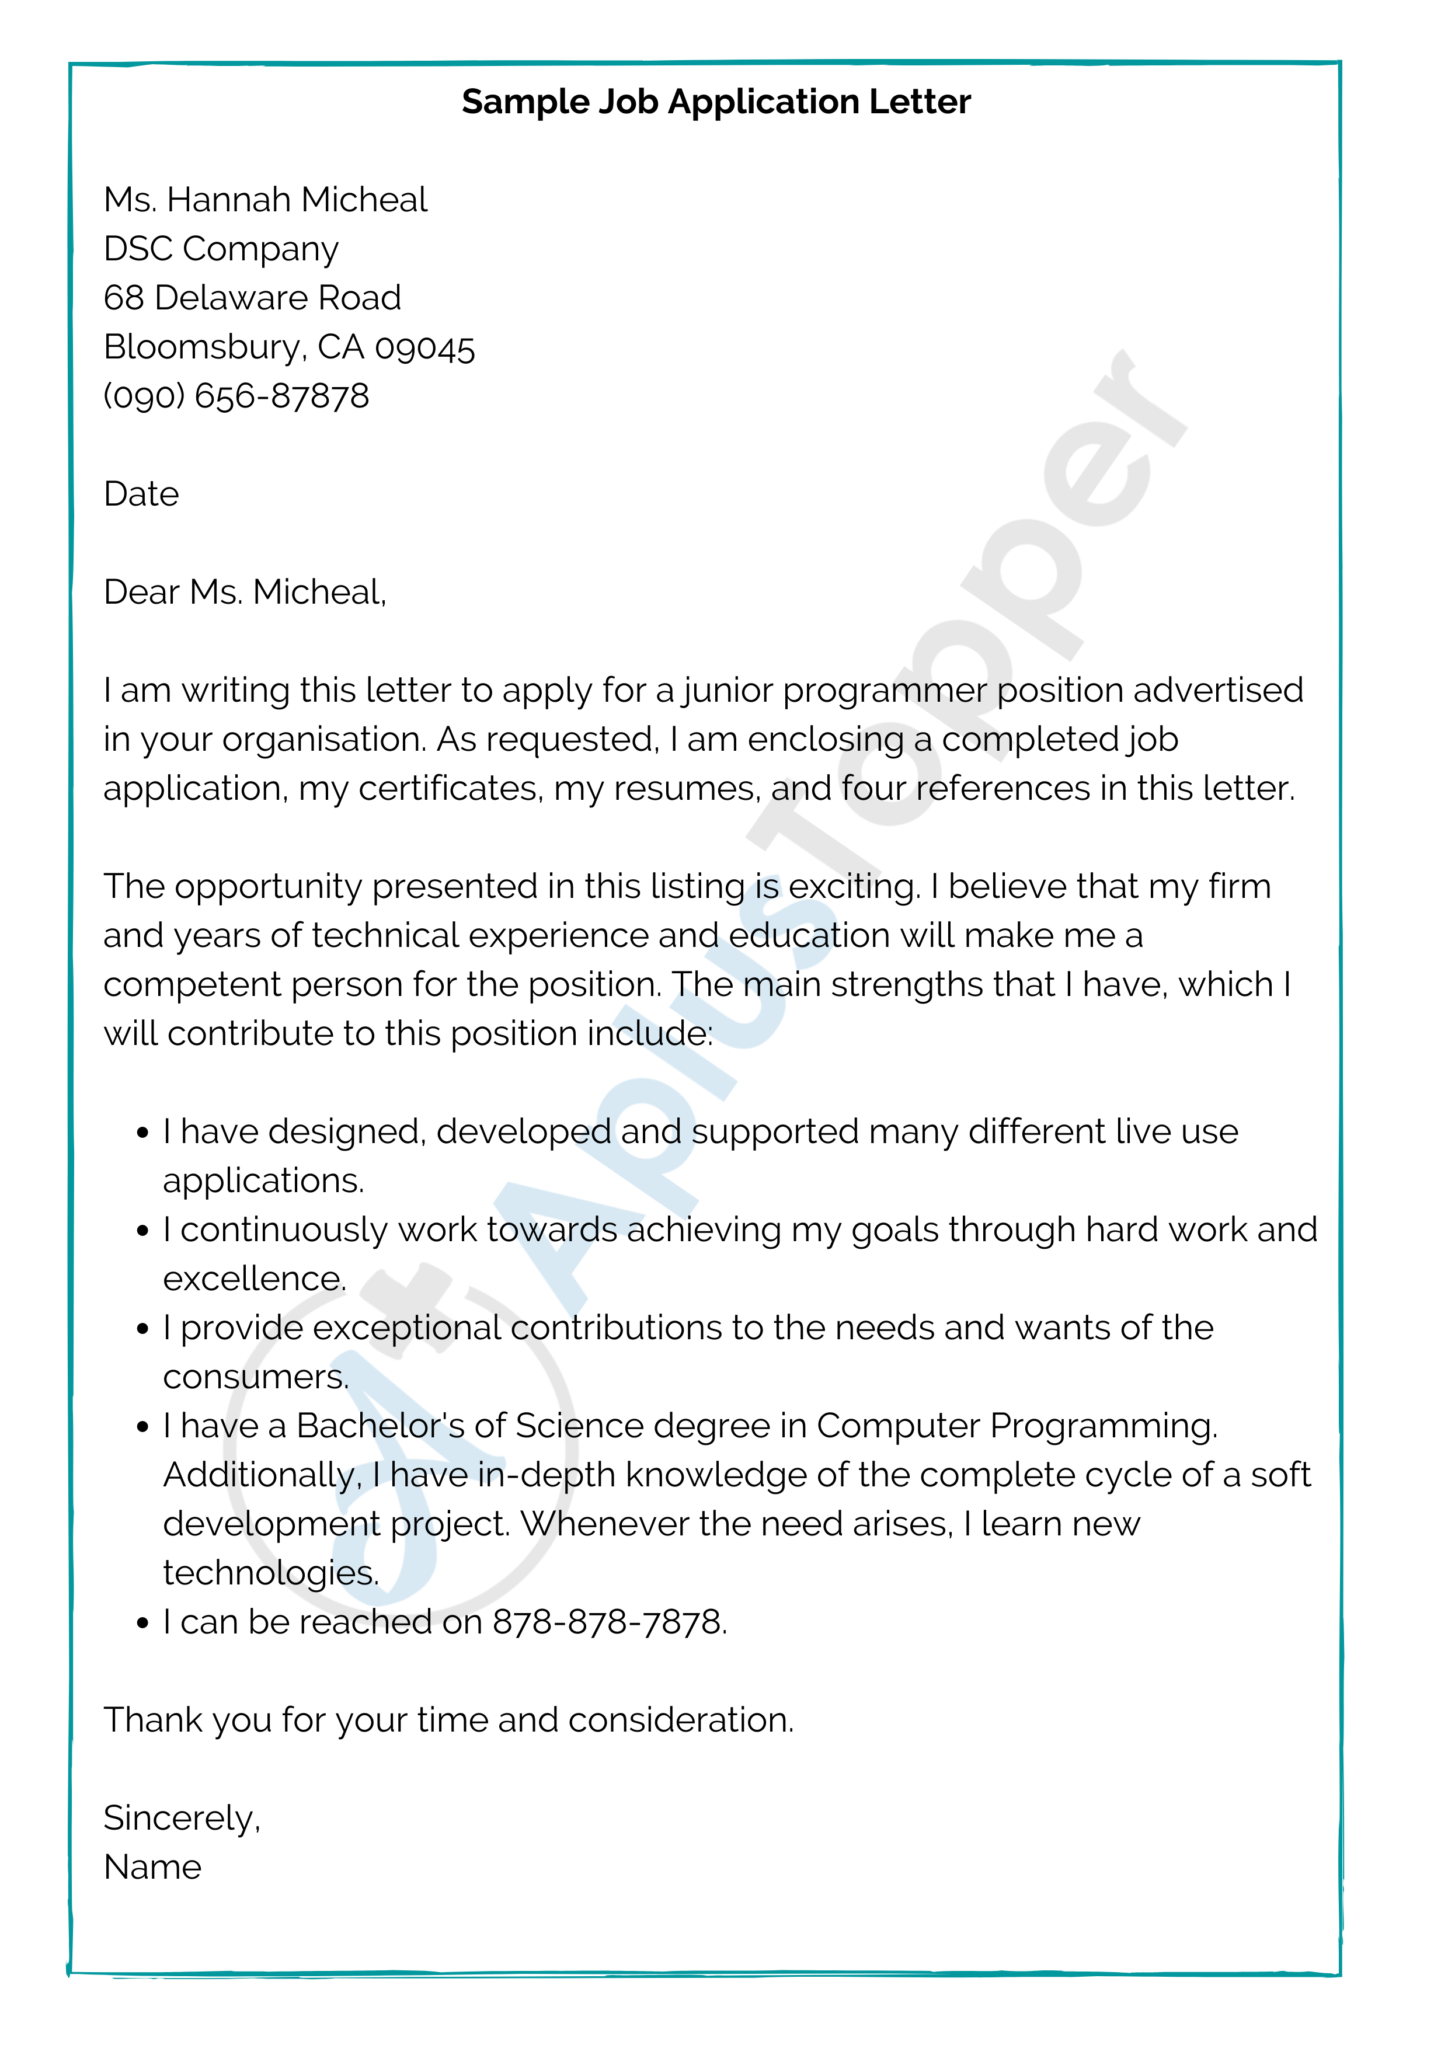 how to write any job application letter